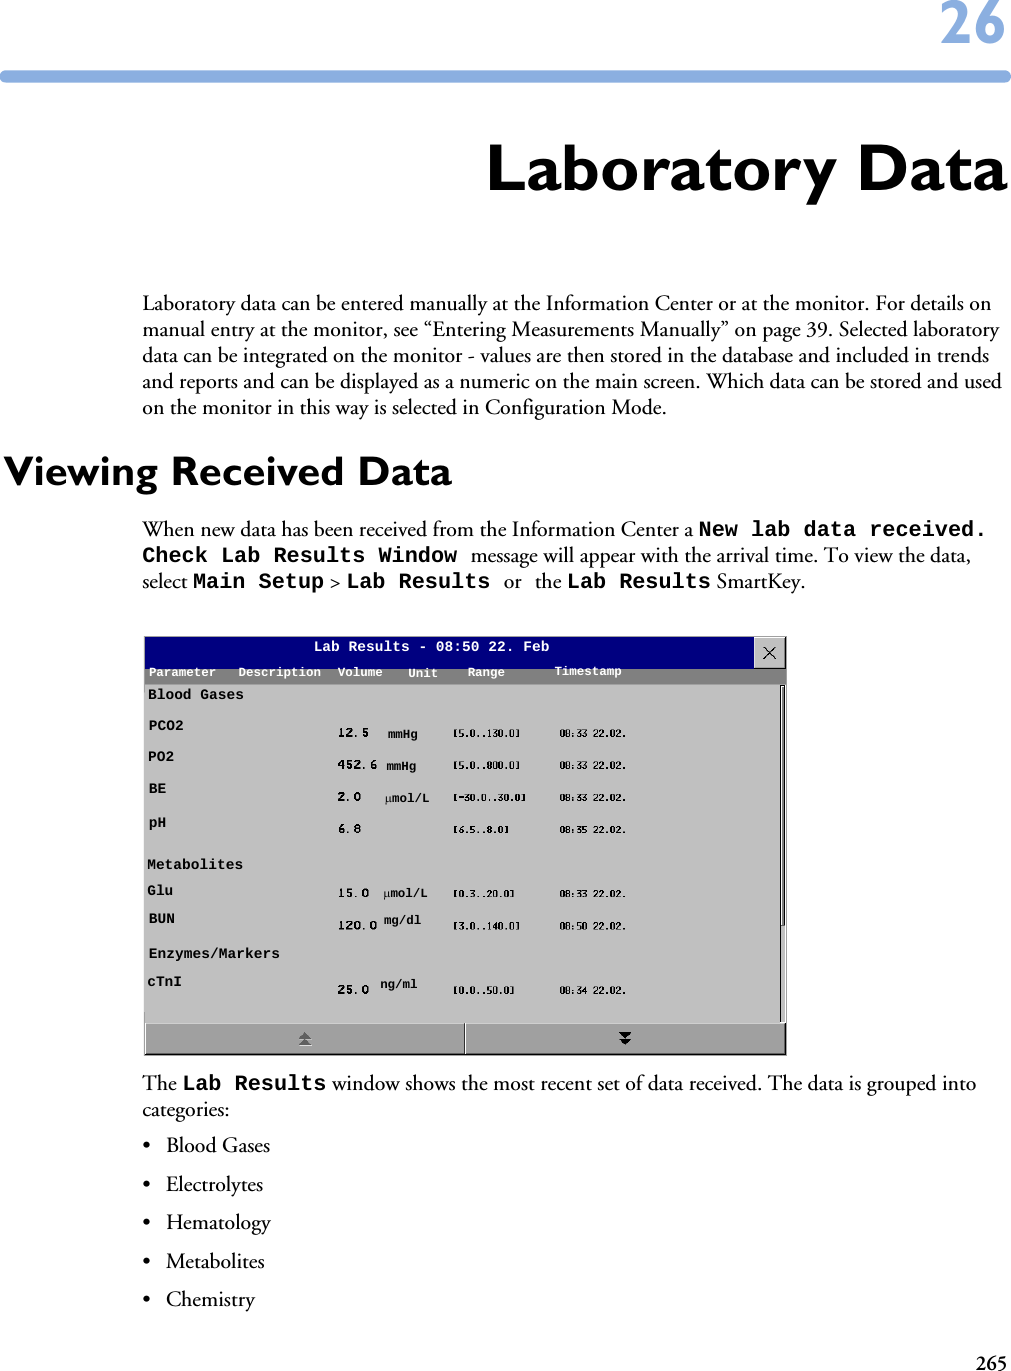 2652626Laboratory DataLaboratory data can be entered manually at the Information Center or at the monitor. For details on manual entry at the monitor, see “Entering Measurements Manually” on page 39. Selected laboratory data can be integrated on the monitor - values are then stored in the database and included in trends and reports and can be displayed as a numeric on the main screen. Which data can be stored and used on the monitor in this way is selected in Configuration Mode. Viewing Received DataWhen new data has been received from the Information Center a New lab data received. Check Lab Results Window message will appear with the arrival time. To view the data, select Main Setup &gt; Lab Results or the Lab Results SmartKey. The Lab Results window shows the most recent set of data received. The data is grouped into categories:• Blood Gases• Electrolytes• Hematology• Metabolites•ChemistryLab Results - 08:50 22. FebParameter Description Volume TimestampUnit RangeBlood GasesPCO2PO2BEpHMetabolitesGluBUNEnzymes/MarkerscTnImmHgmmHgmol/Lmol/Lmg/dlng/ml